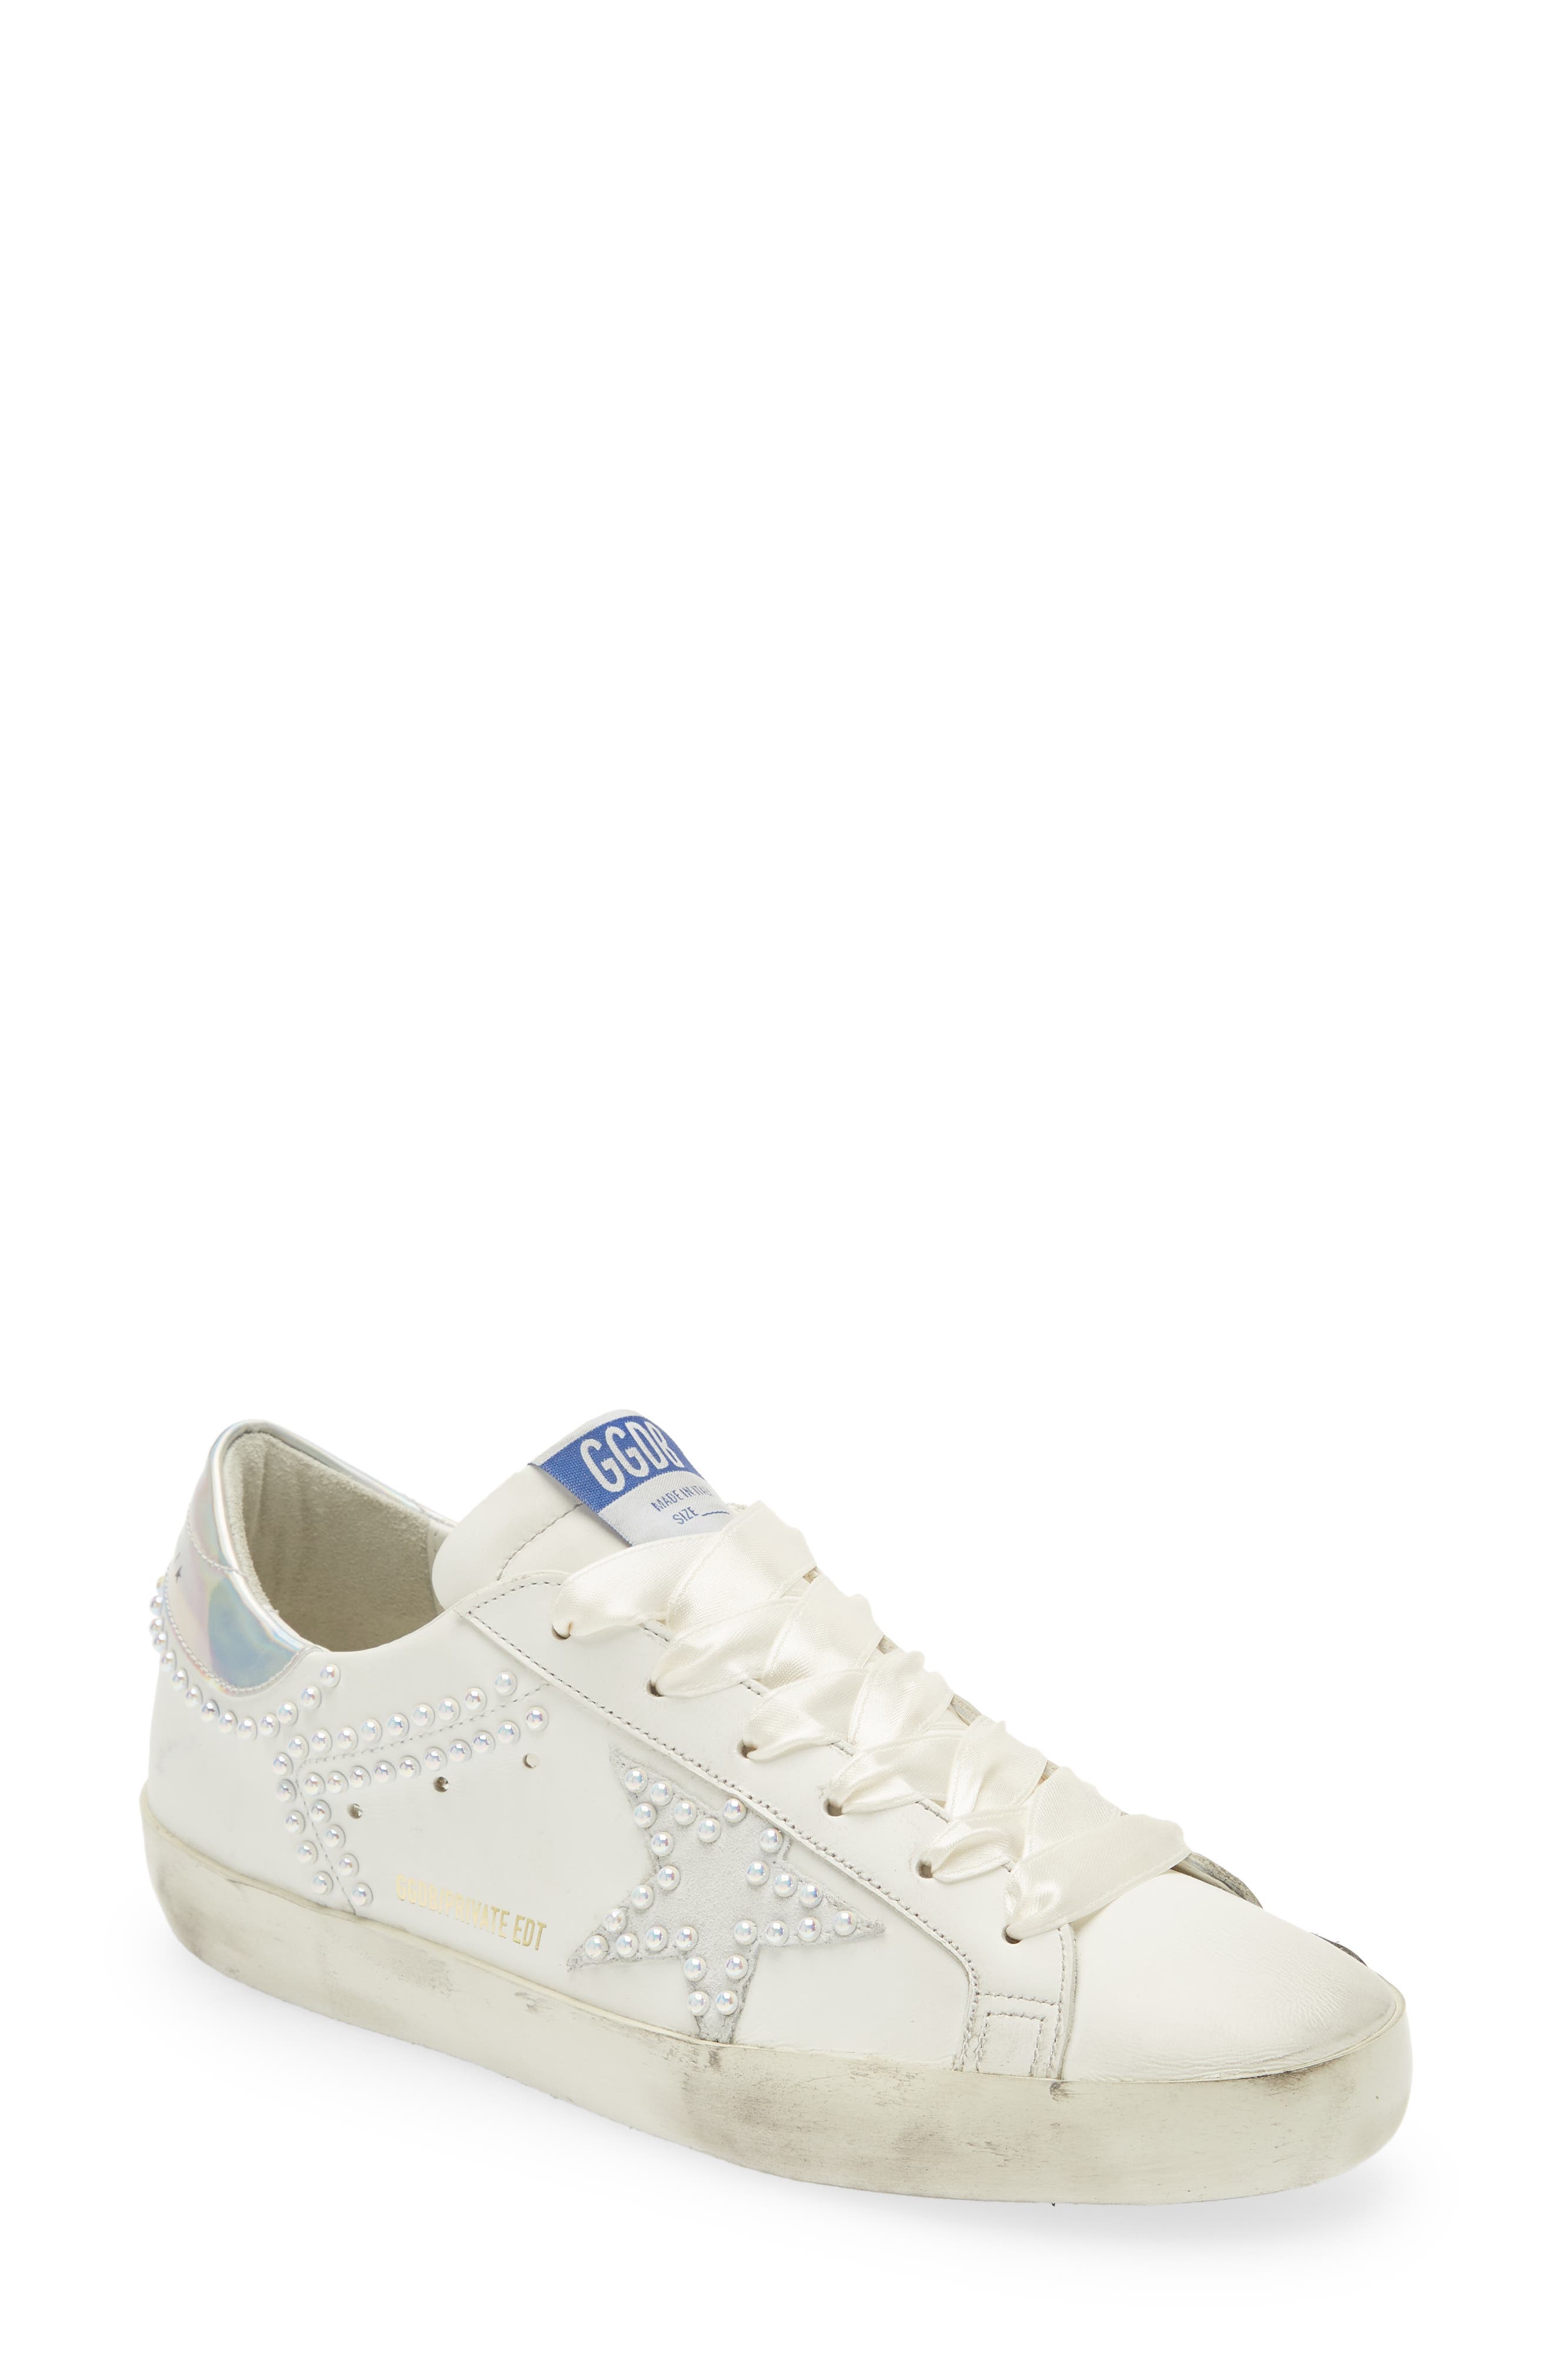 Golden Goose's New Private Edition Super-Star Sneakers